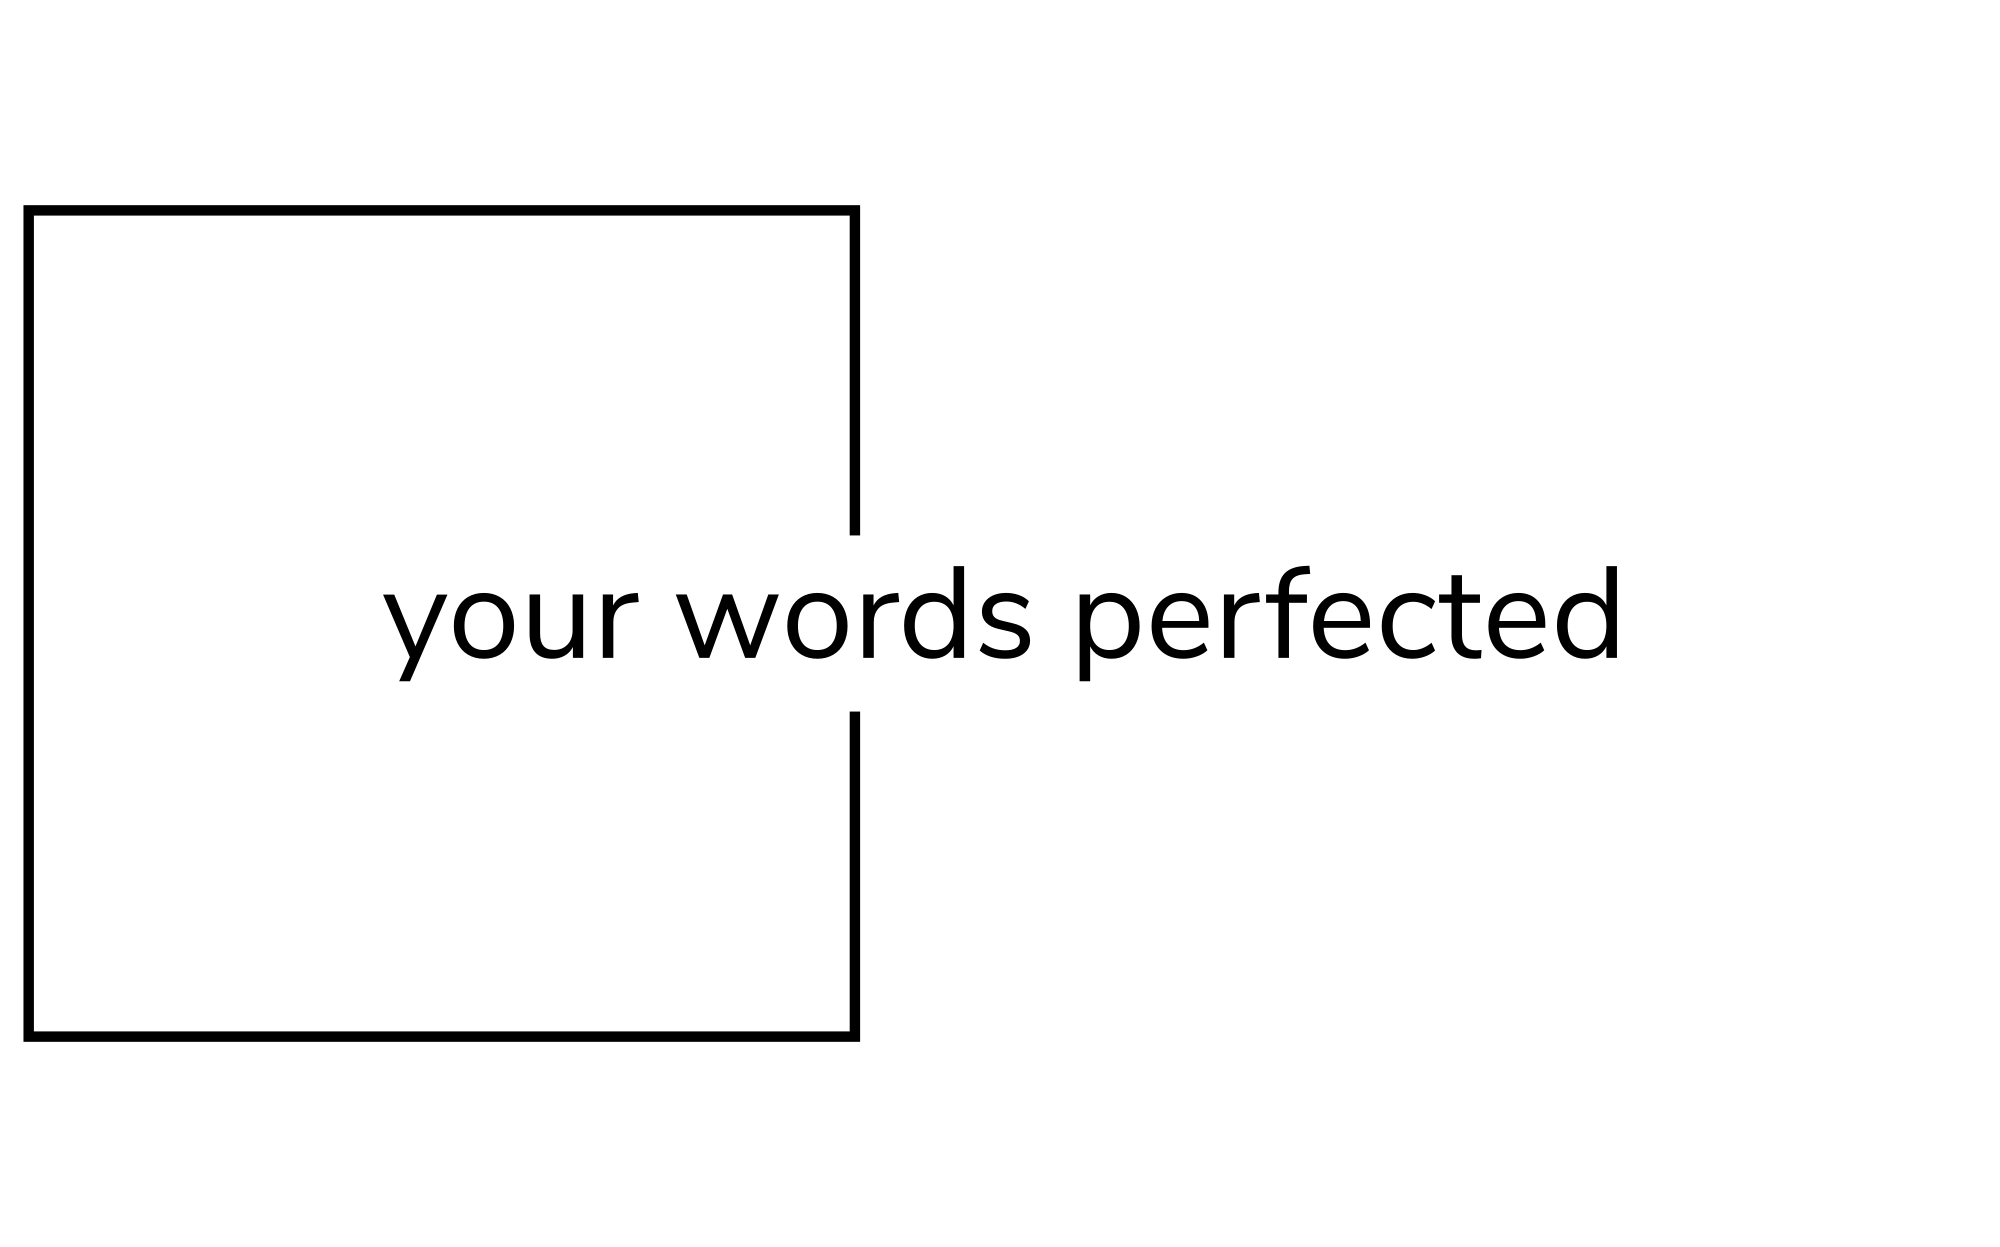 Your words perfected